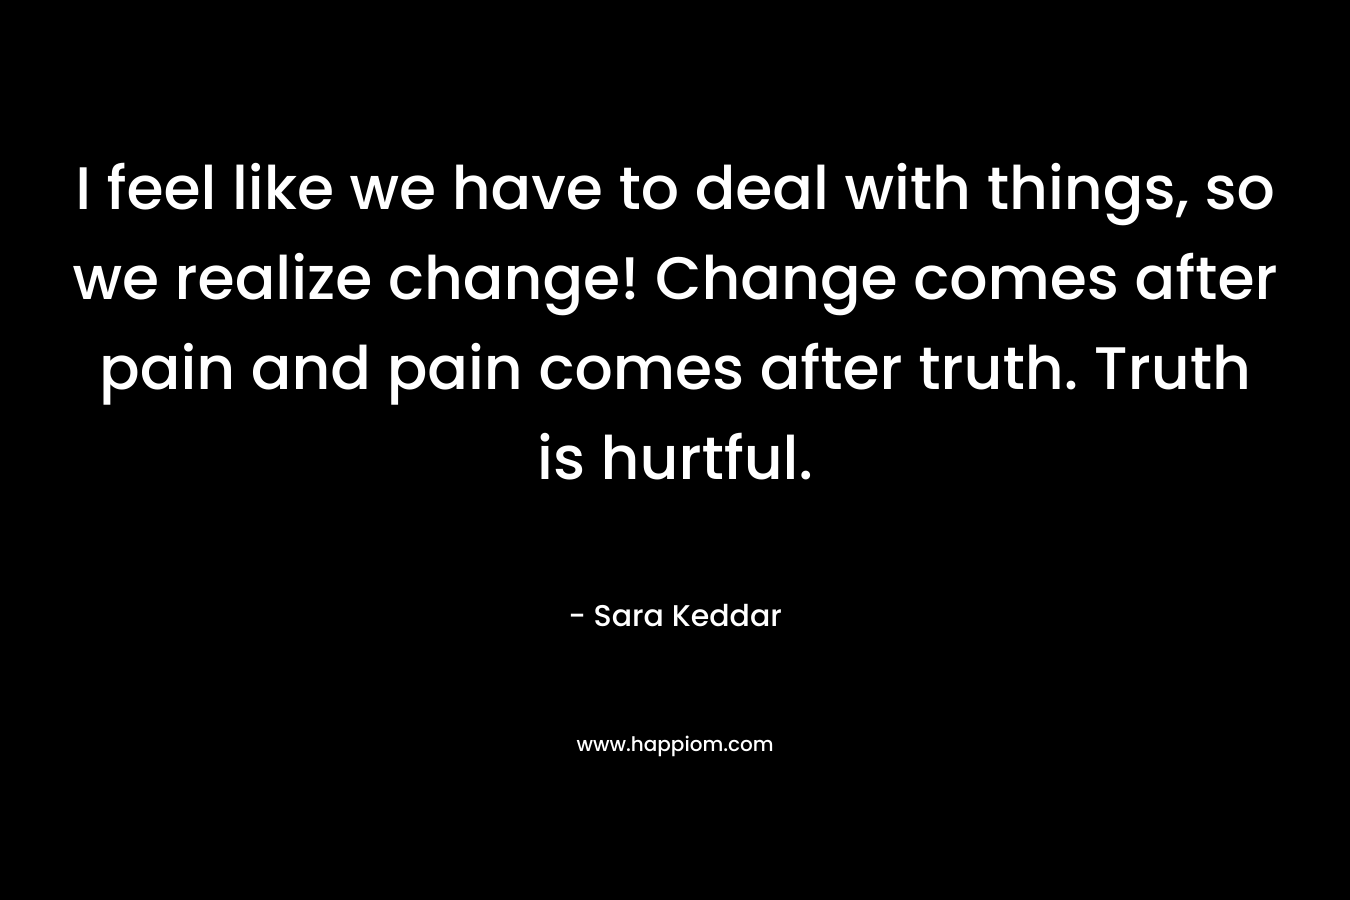 I feel like we have to deal with things, so we realize change! Change comes after pain and pain comes after truth. Truth is hurtful.